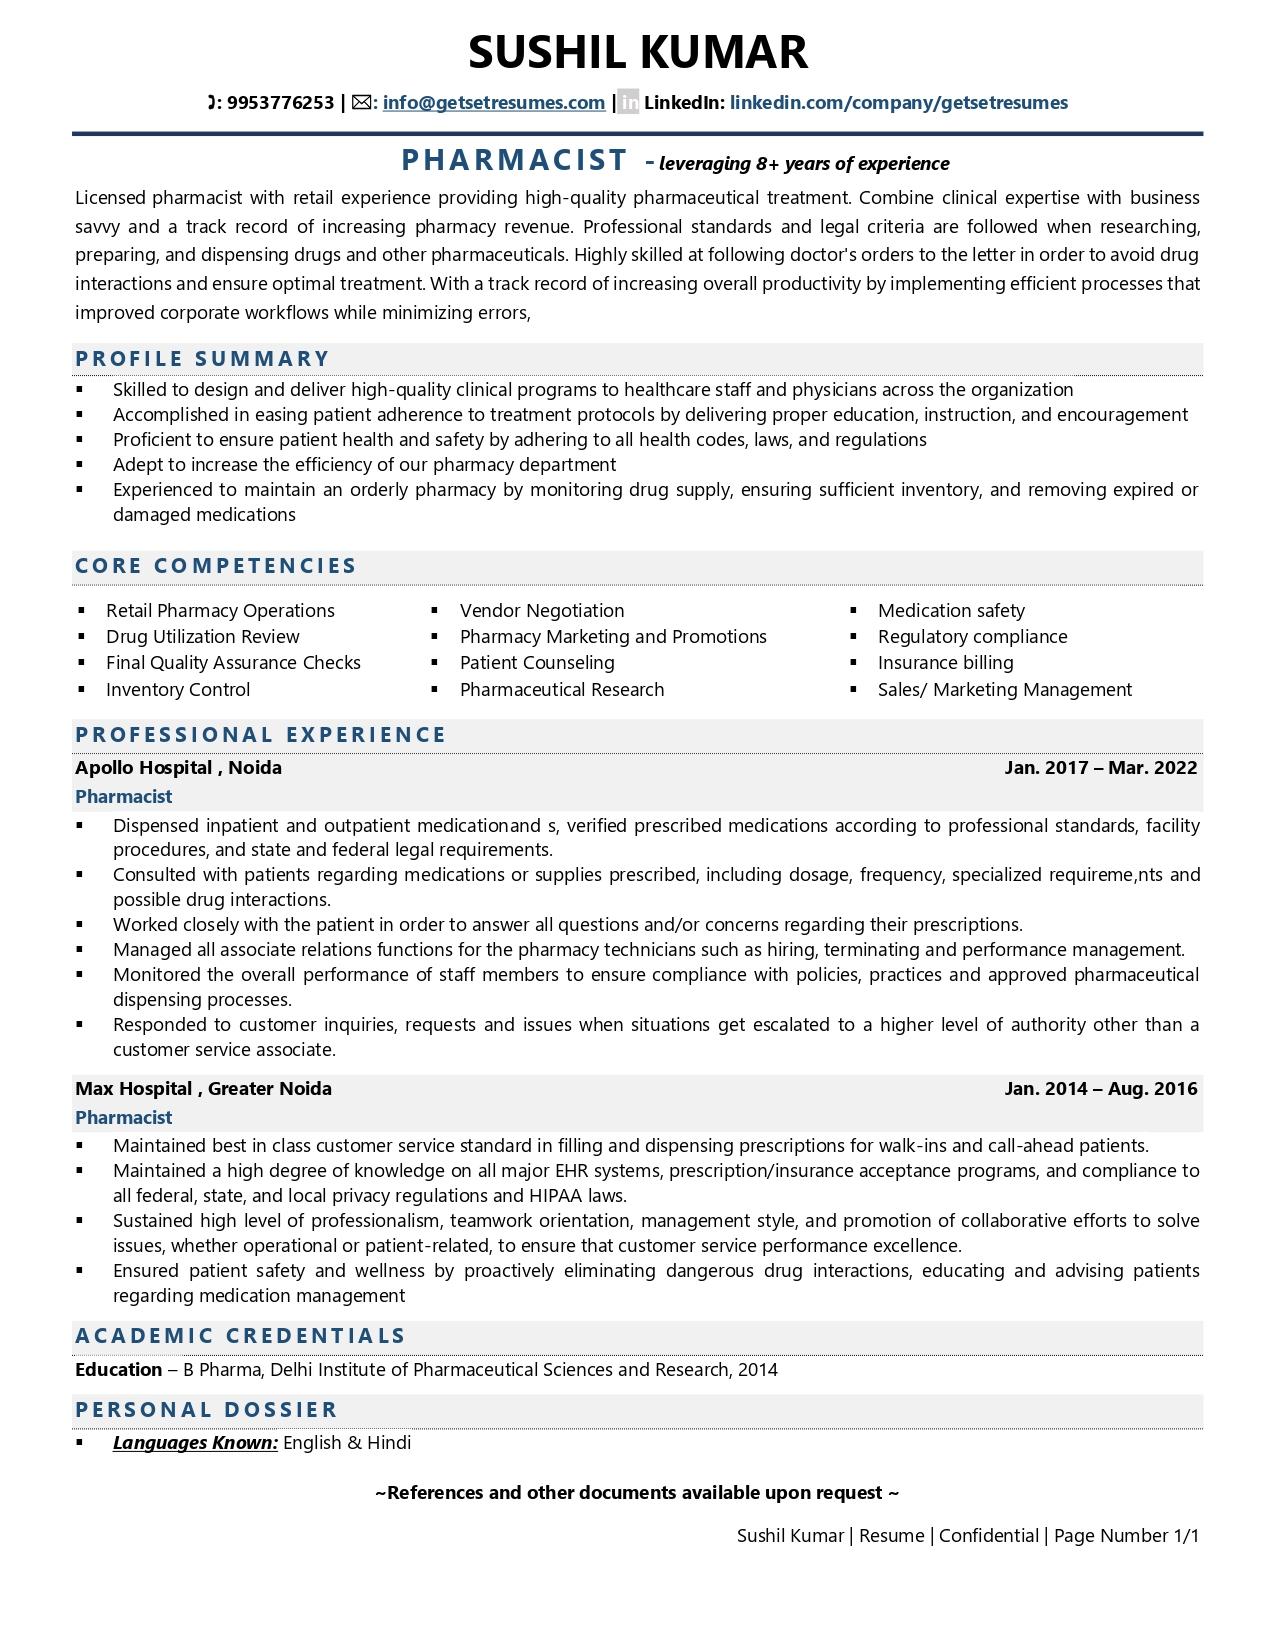 Pharmacist Resume Examples & Template (with job winning tips)